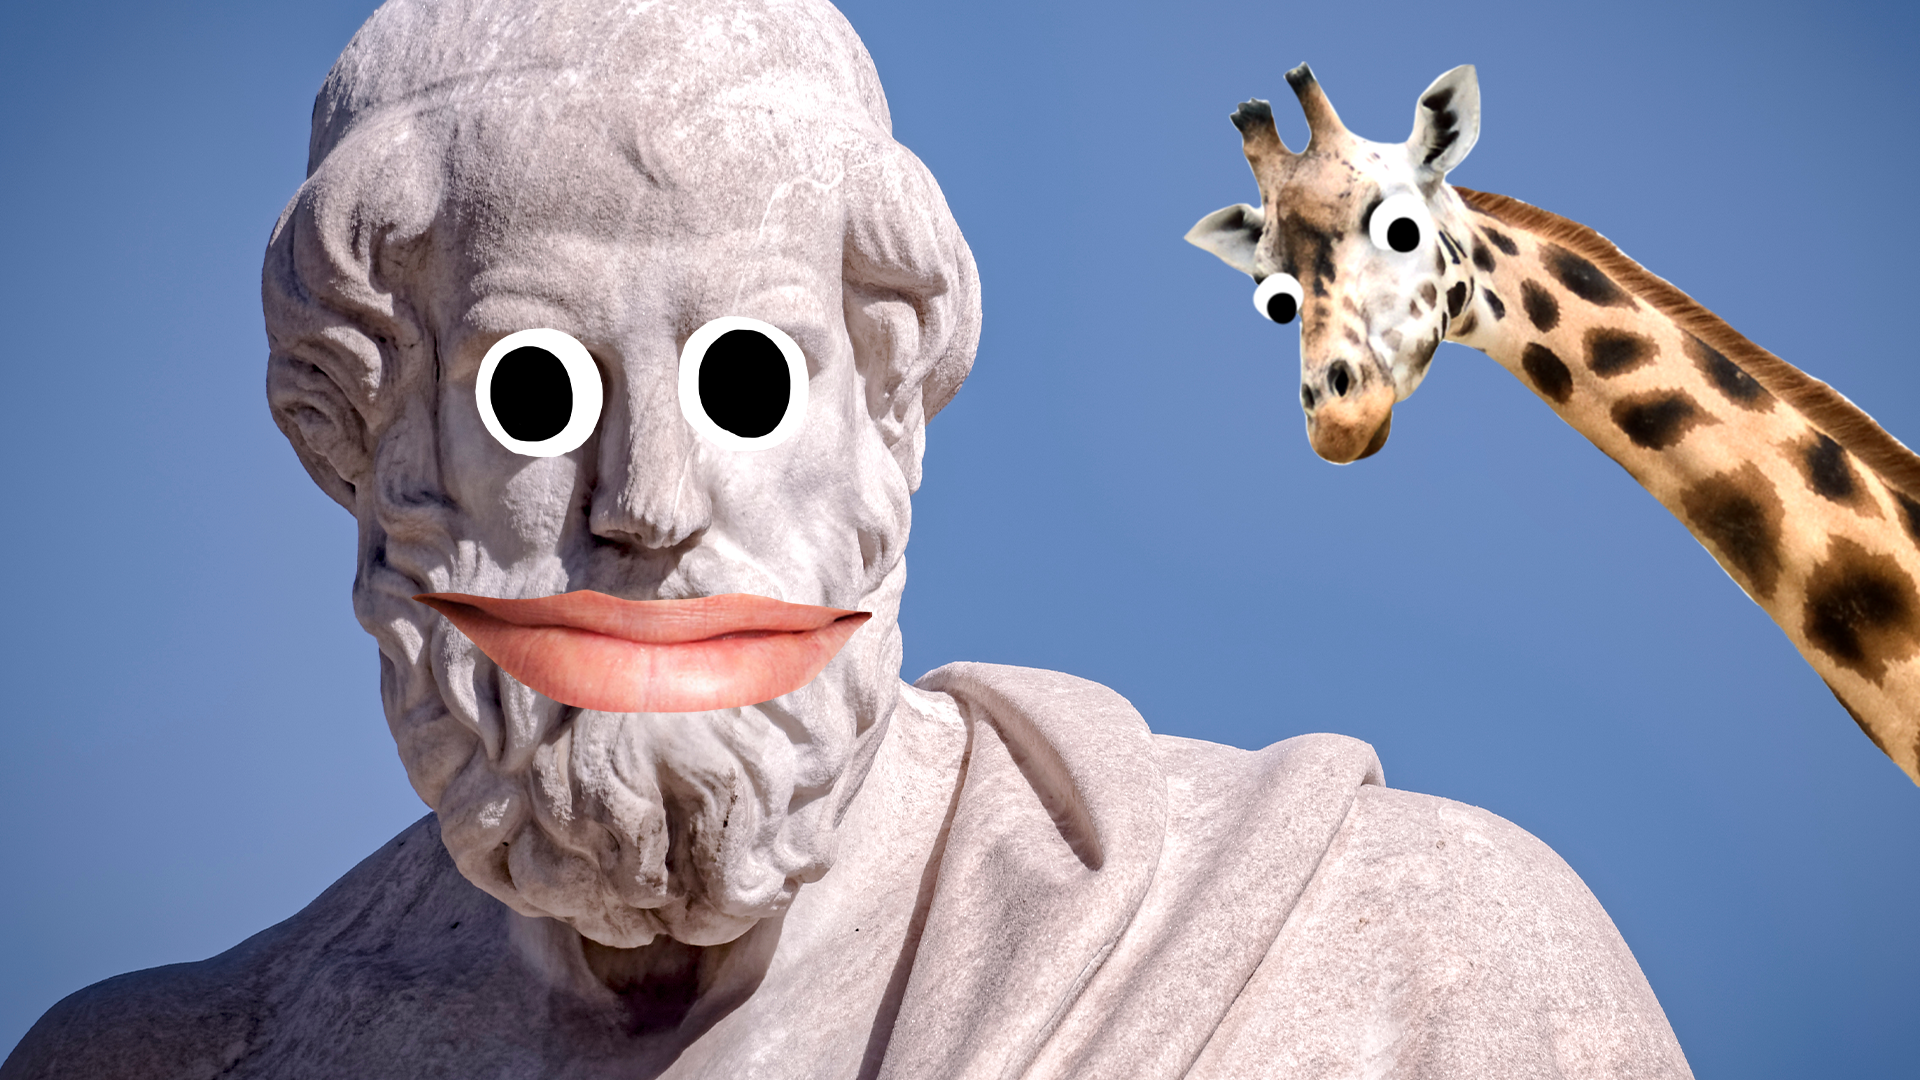 Ancient Greek statue with Beano face and giraffe